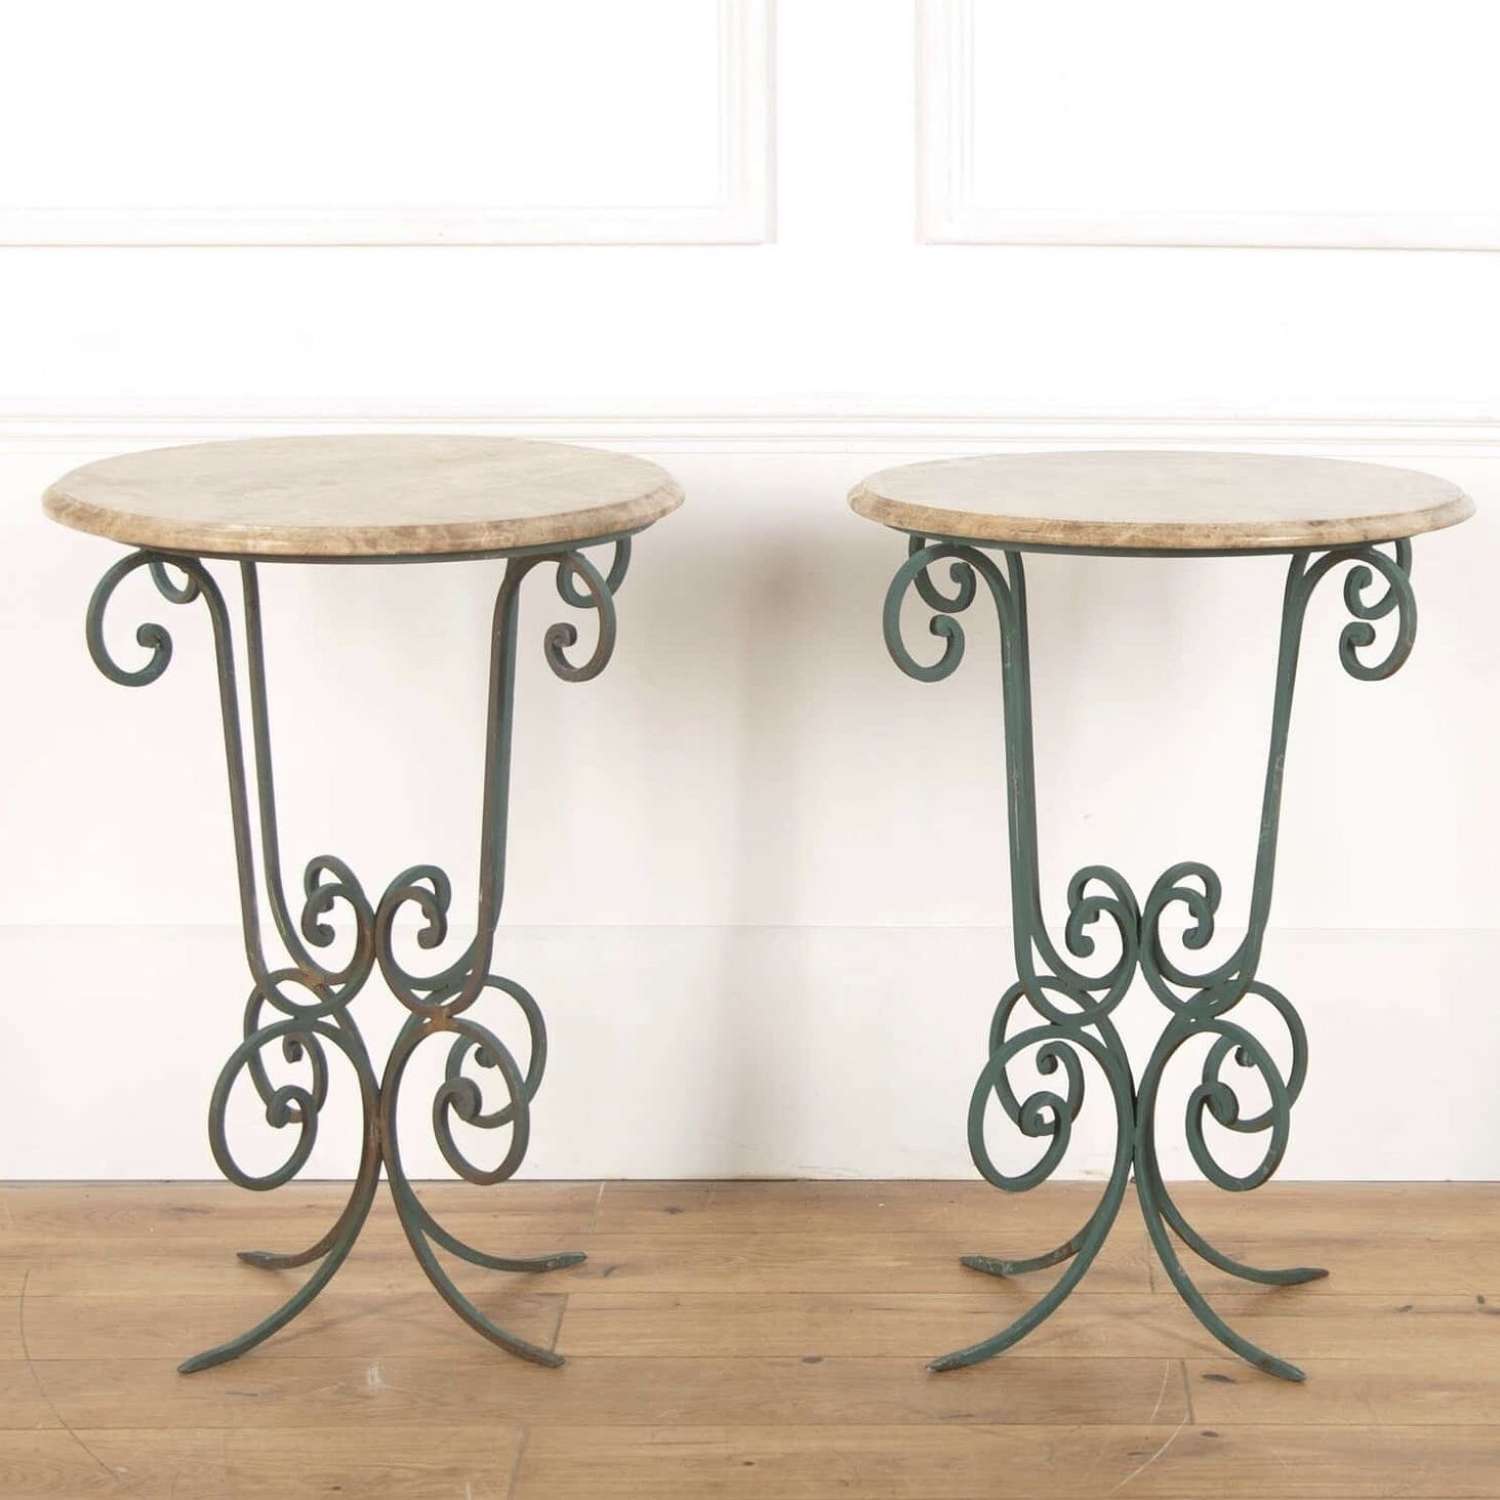 Decorative pair of stone and painted scroll iron tables